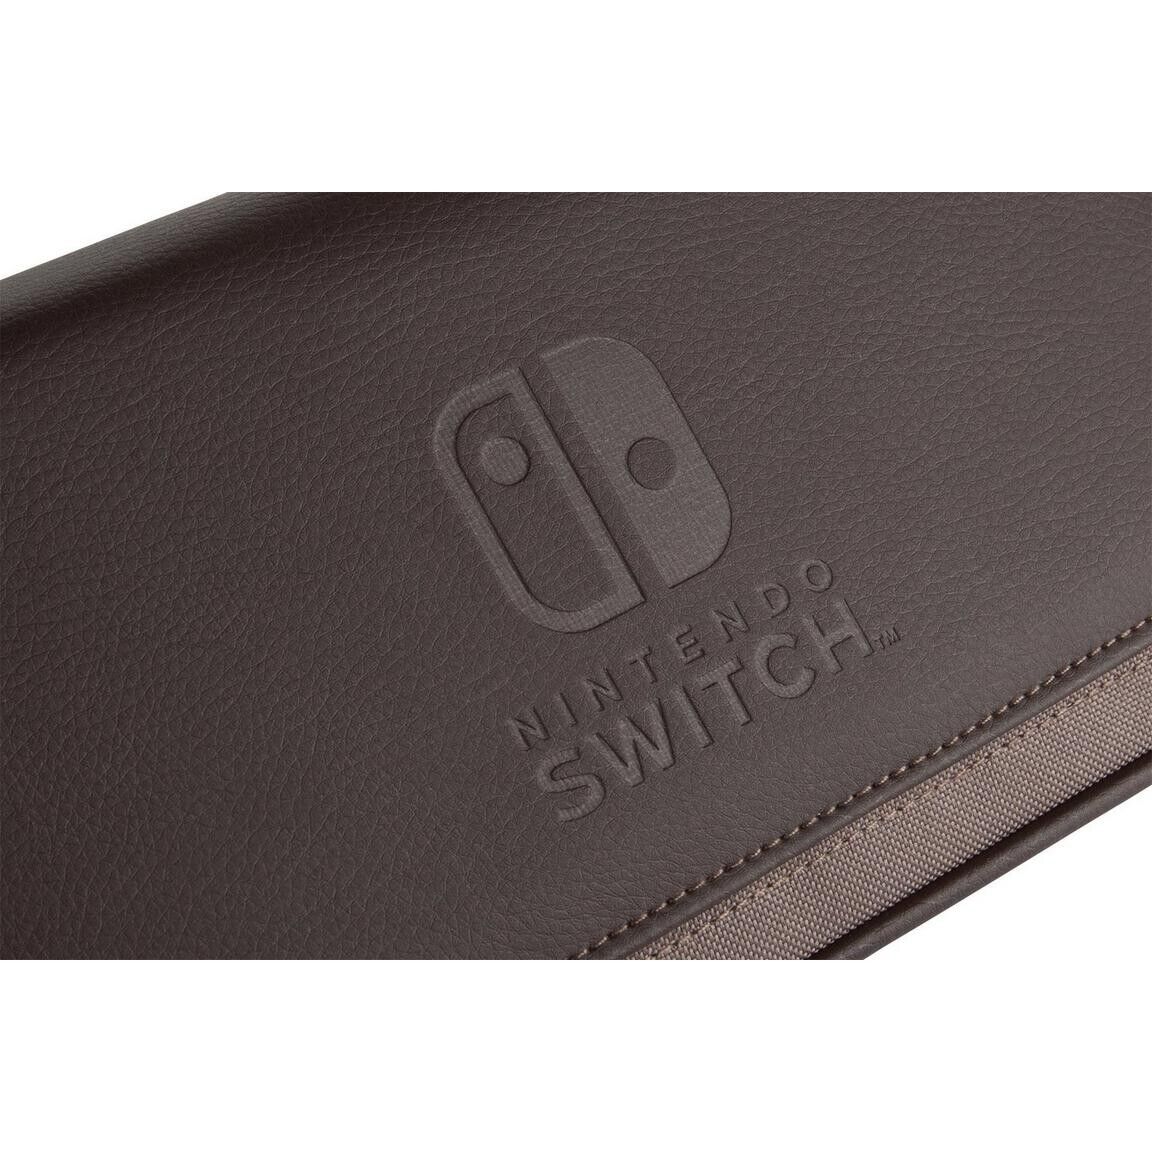 PowerA Nintendo Switch Carrying Protective Clutch Bag Pochette for All Models - Ricky's Garage